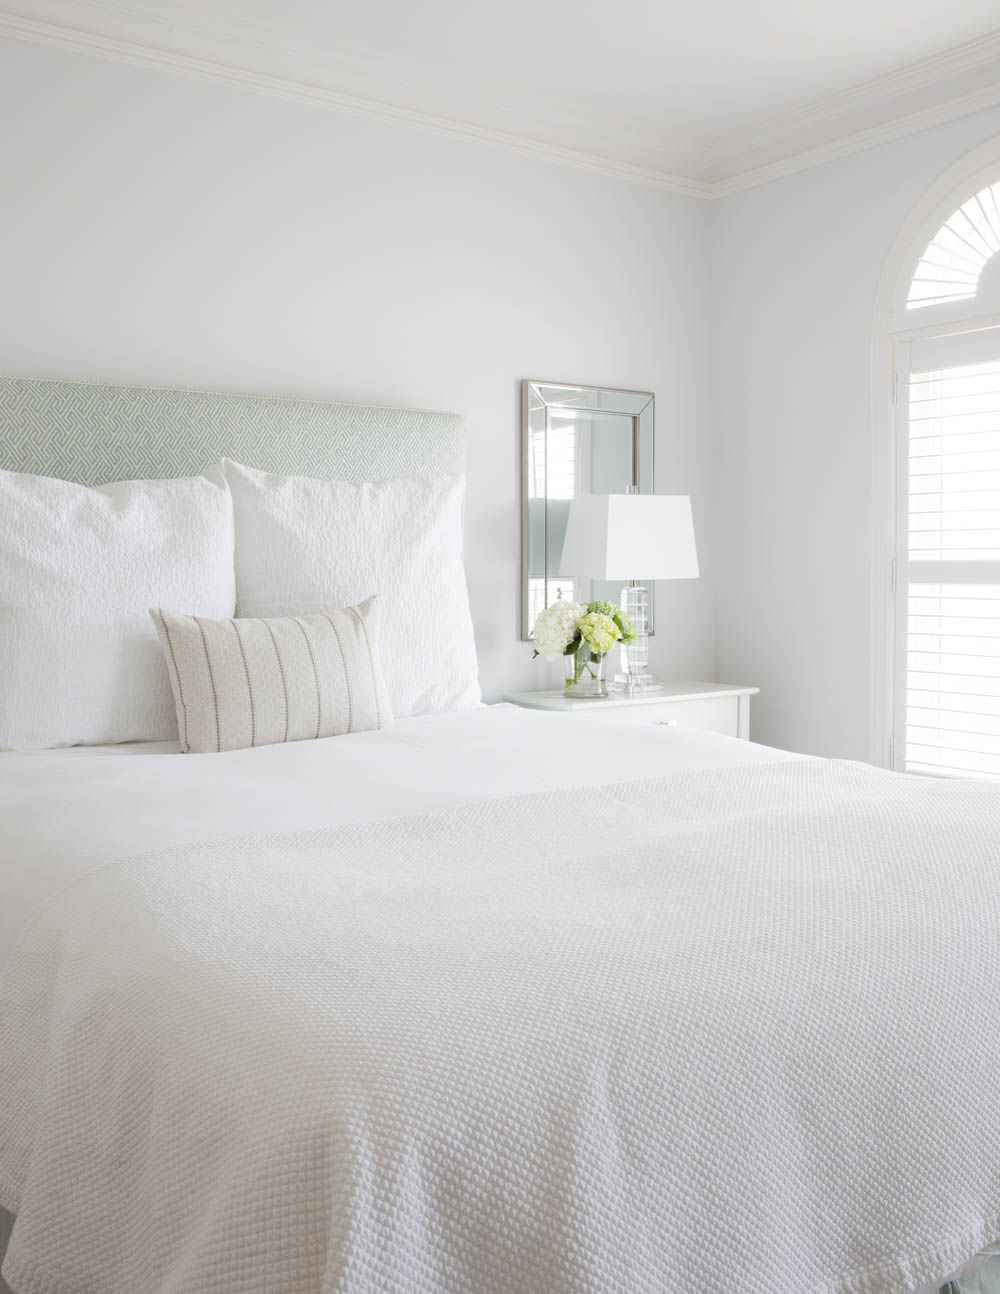 white bed with three cushions, light green patterned headboard, mirror behind lamp on white sidetable with flowers, shutters